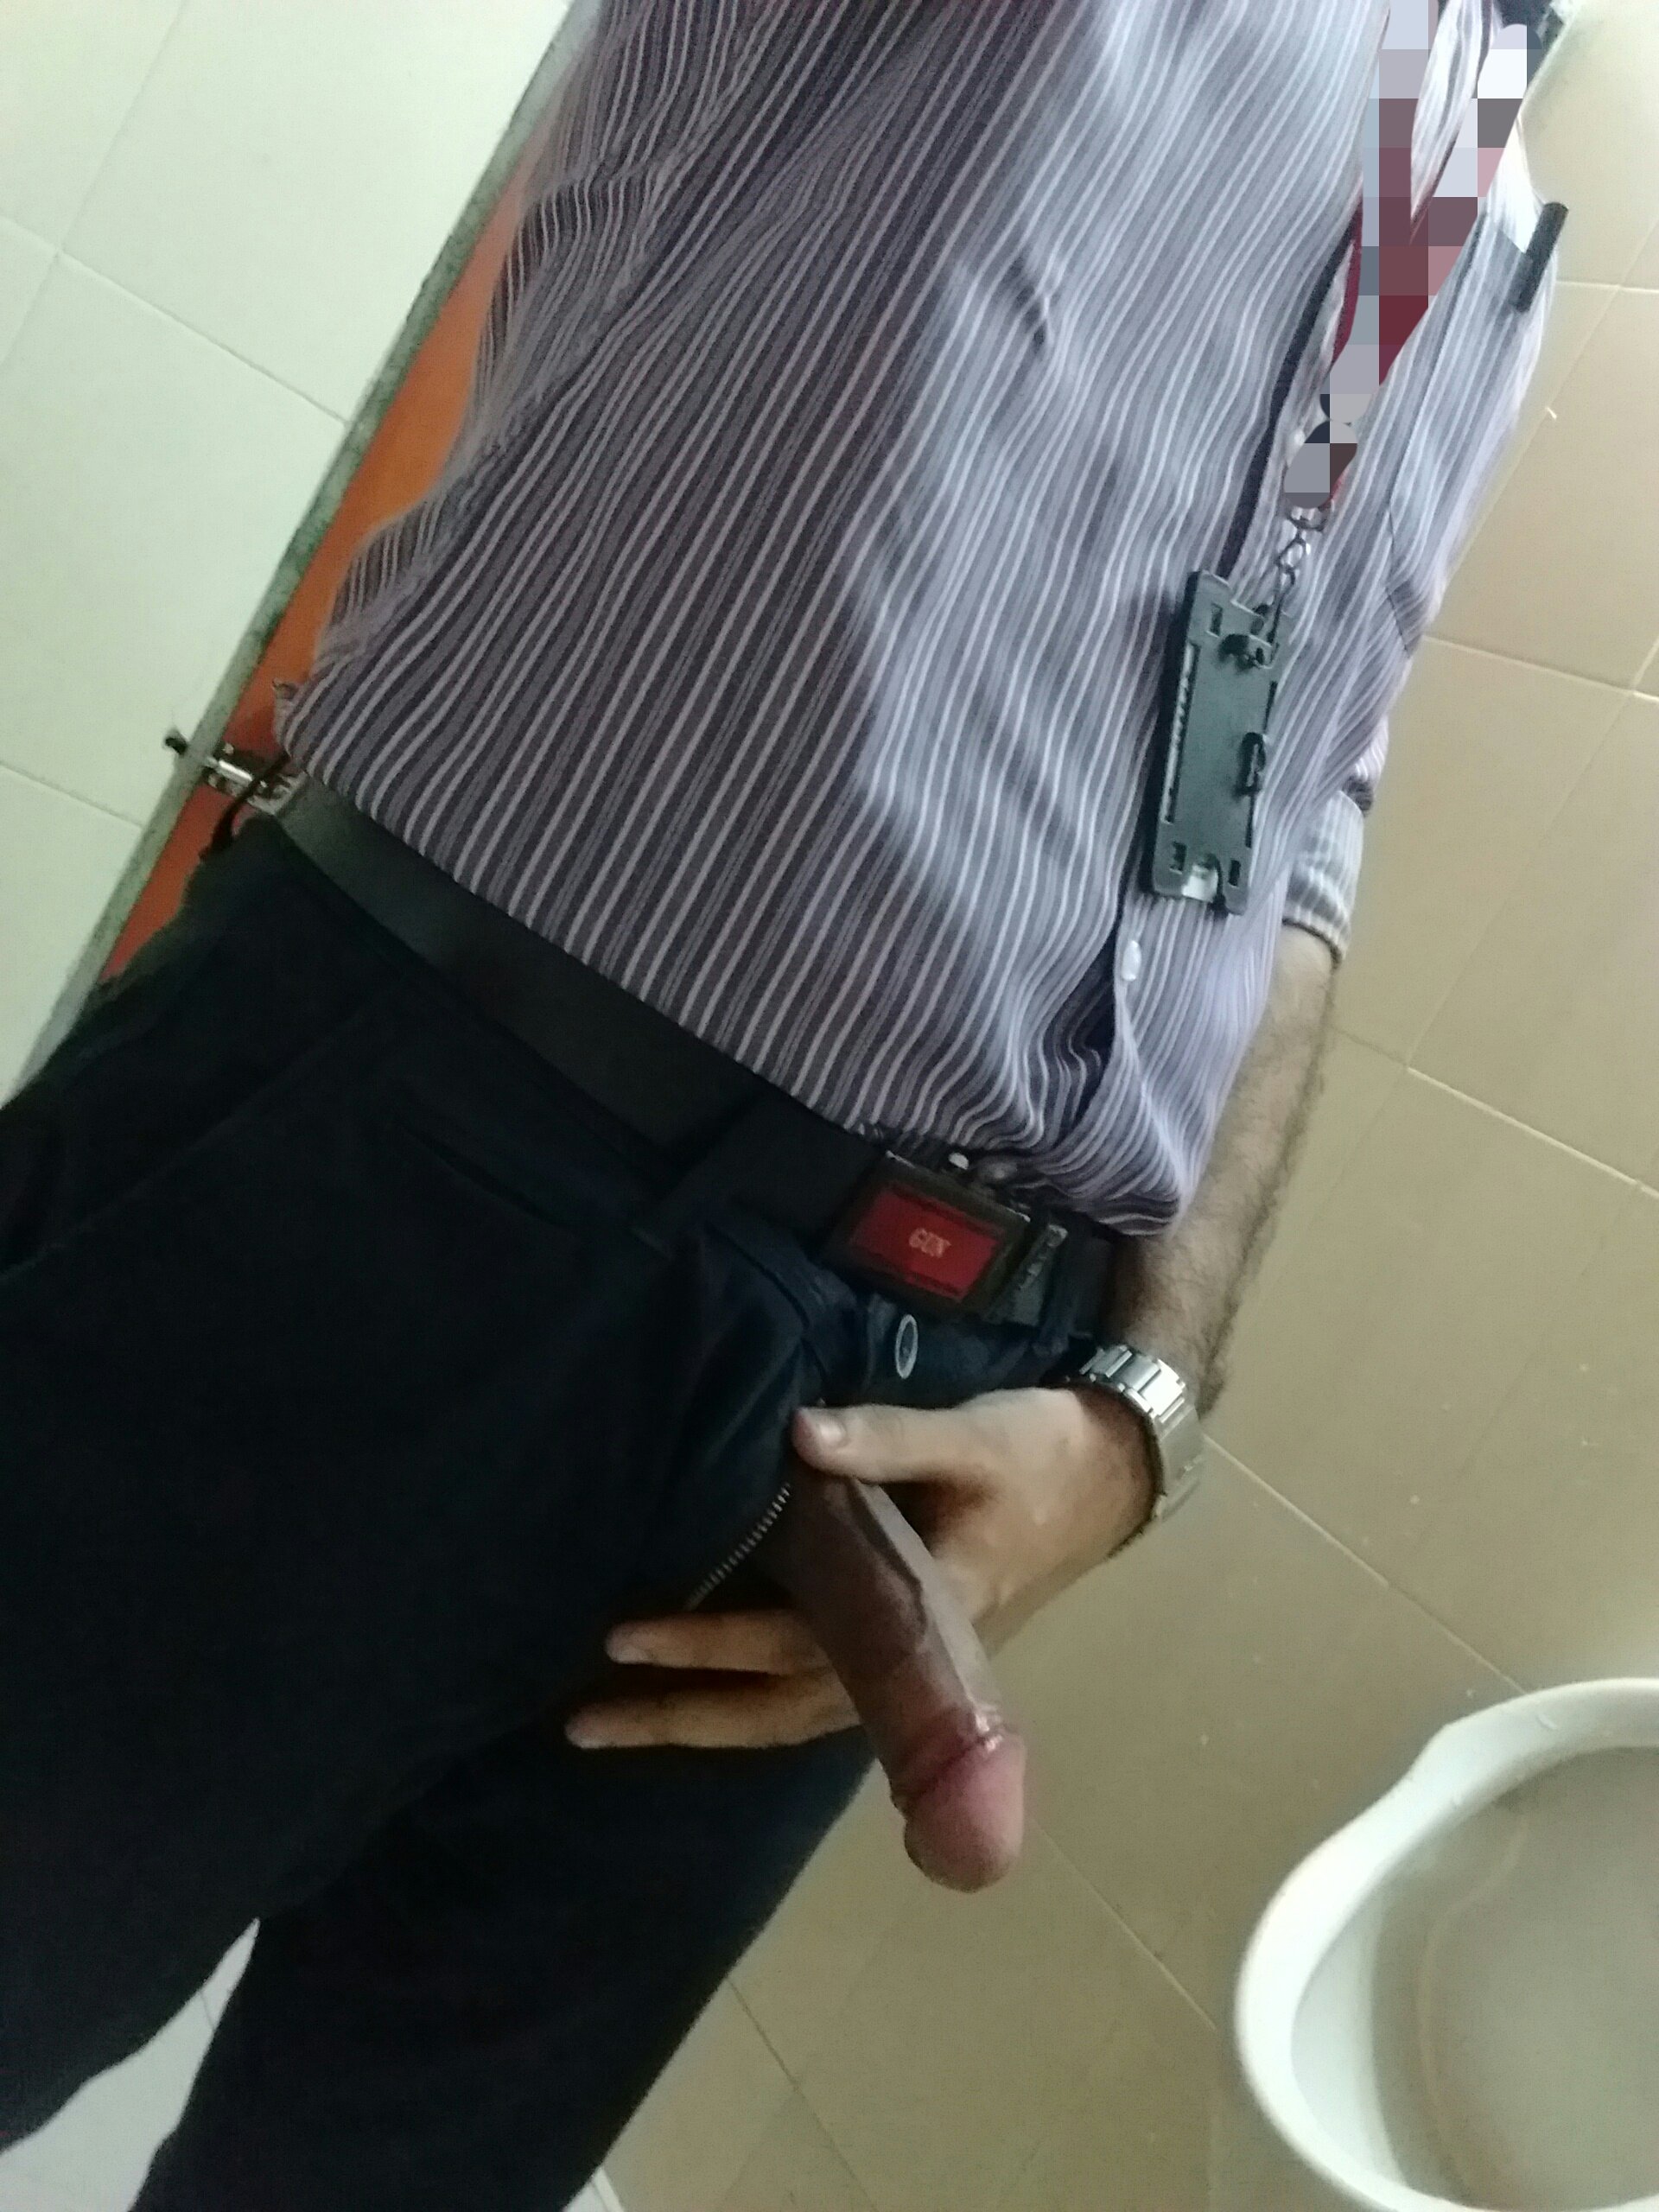 Jerking rock hard cock after office